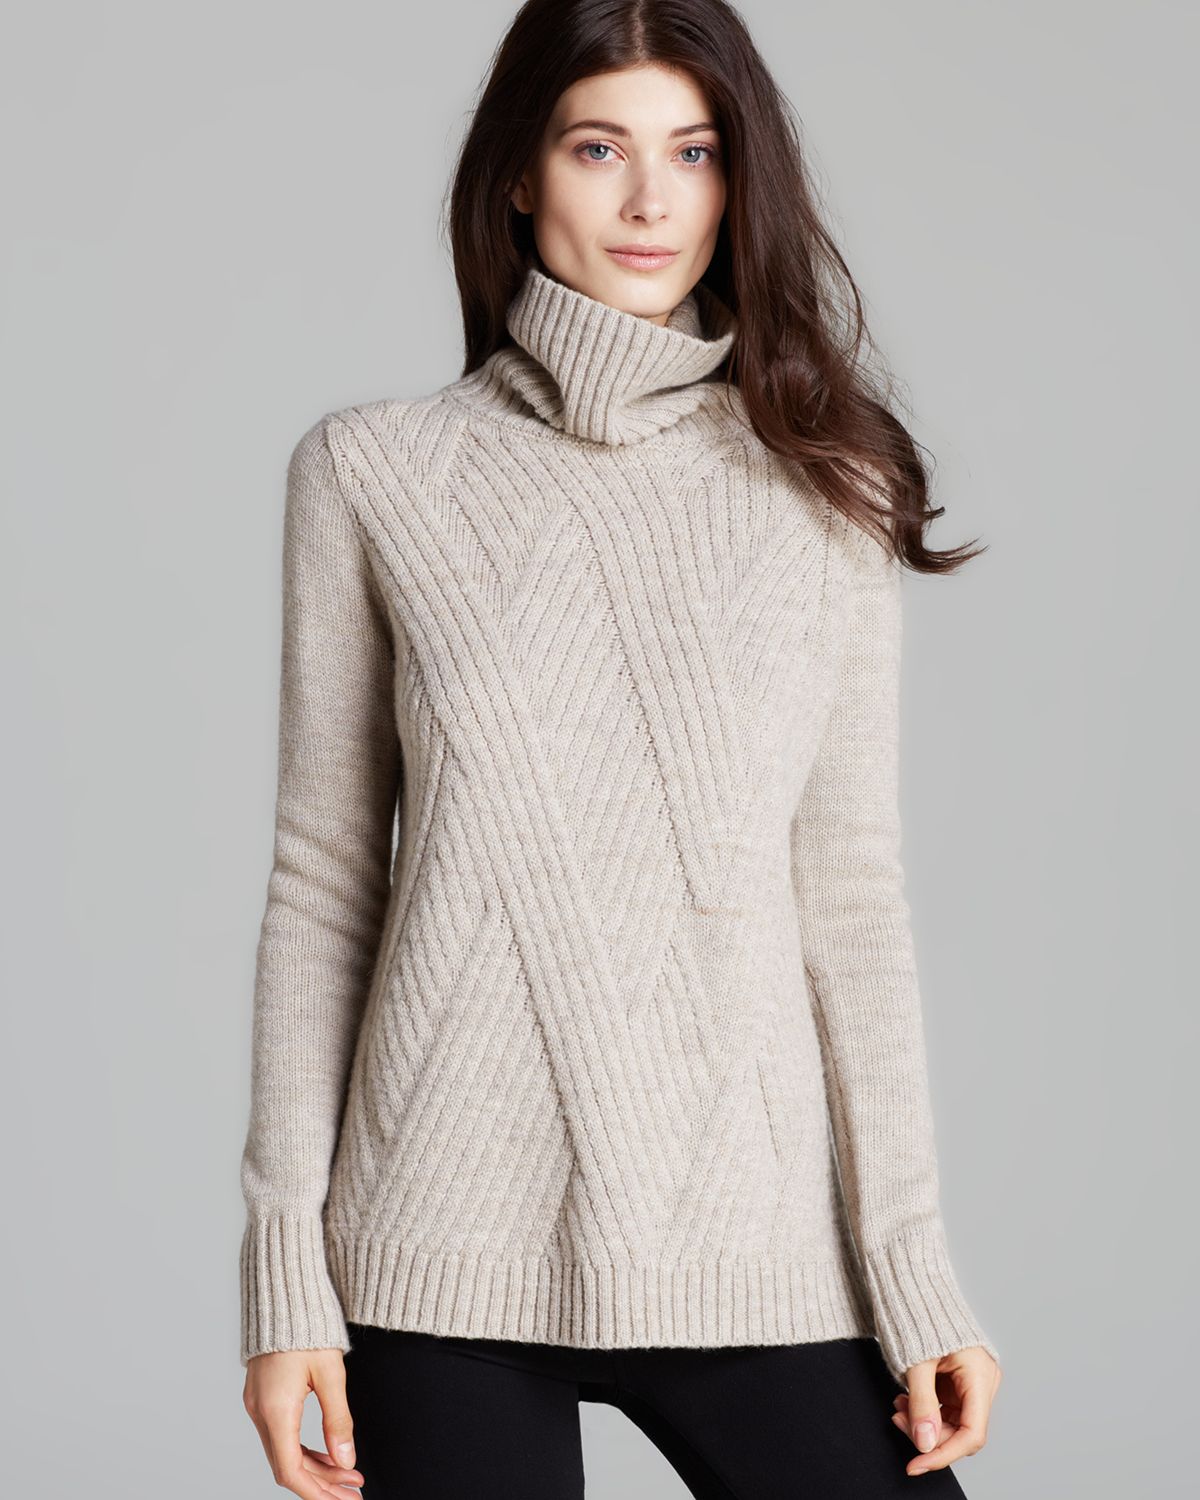 Lyst - Vince Sweater Traveling Turtleneck in Natural